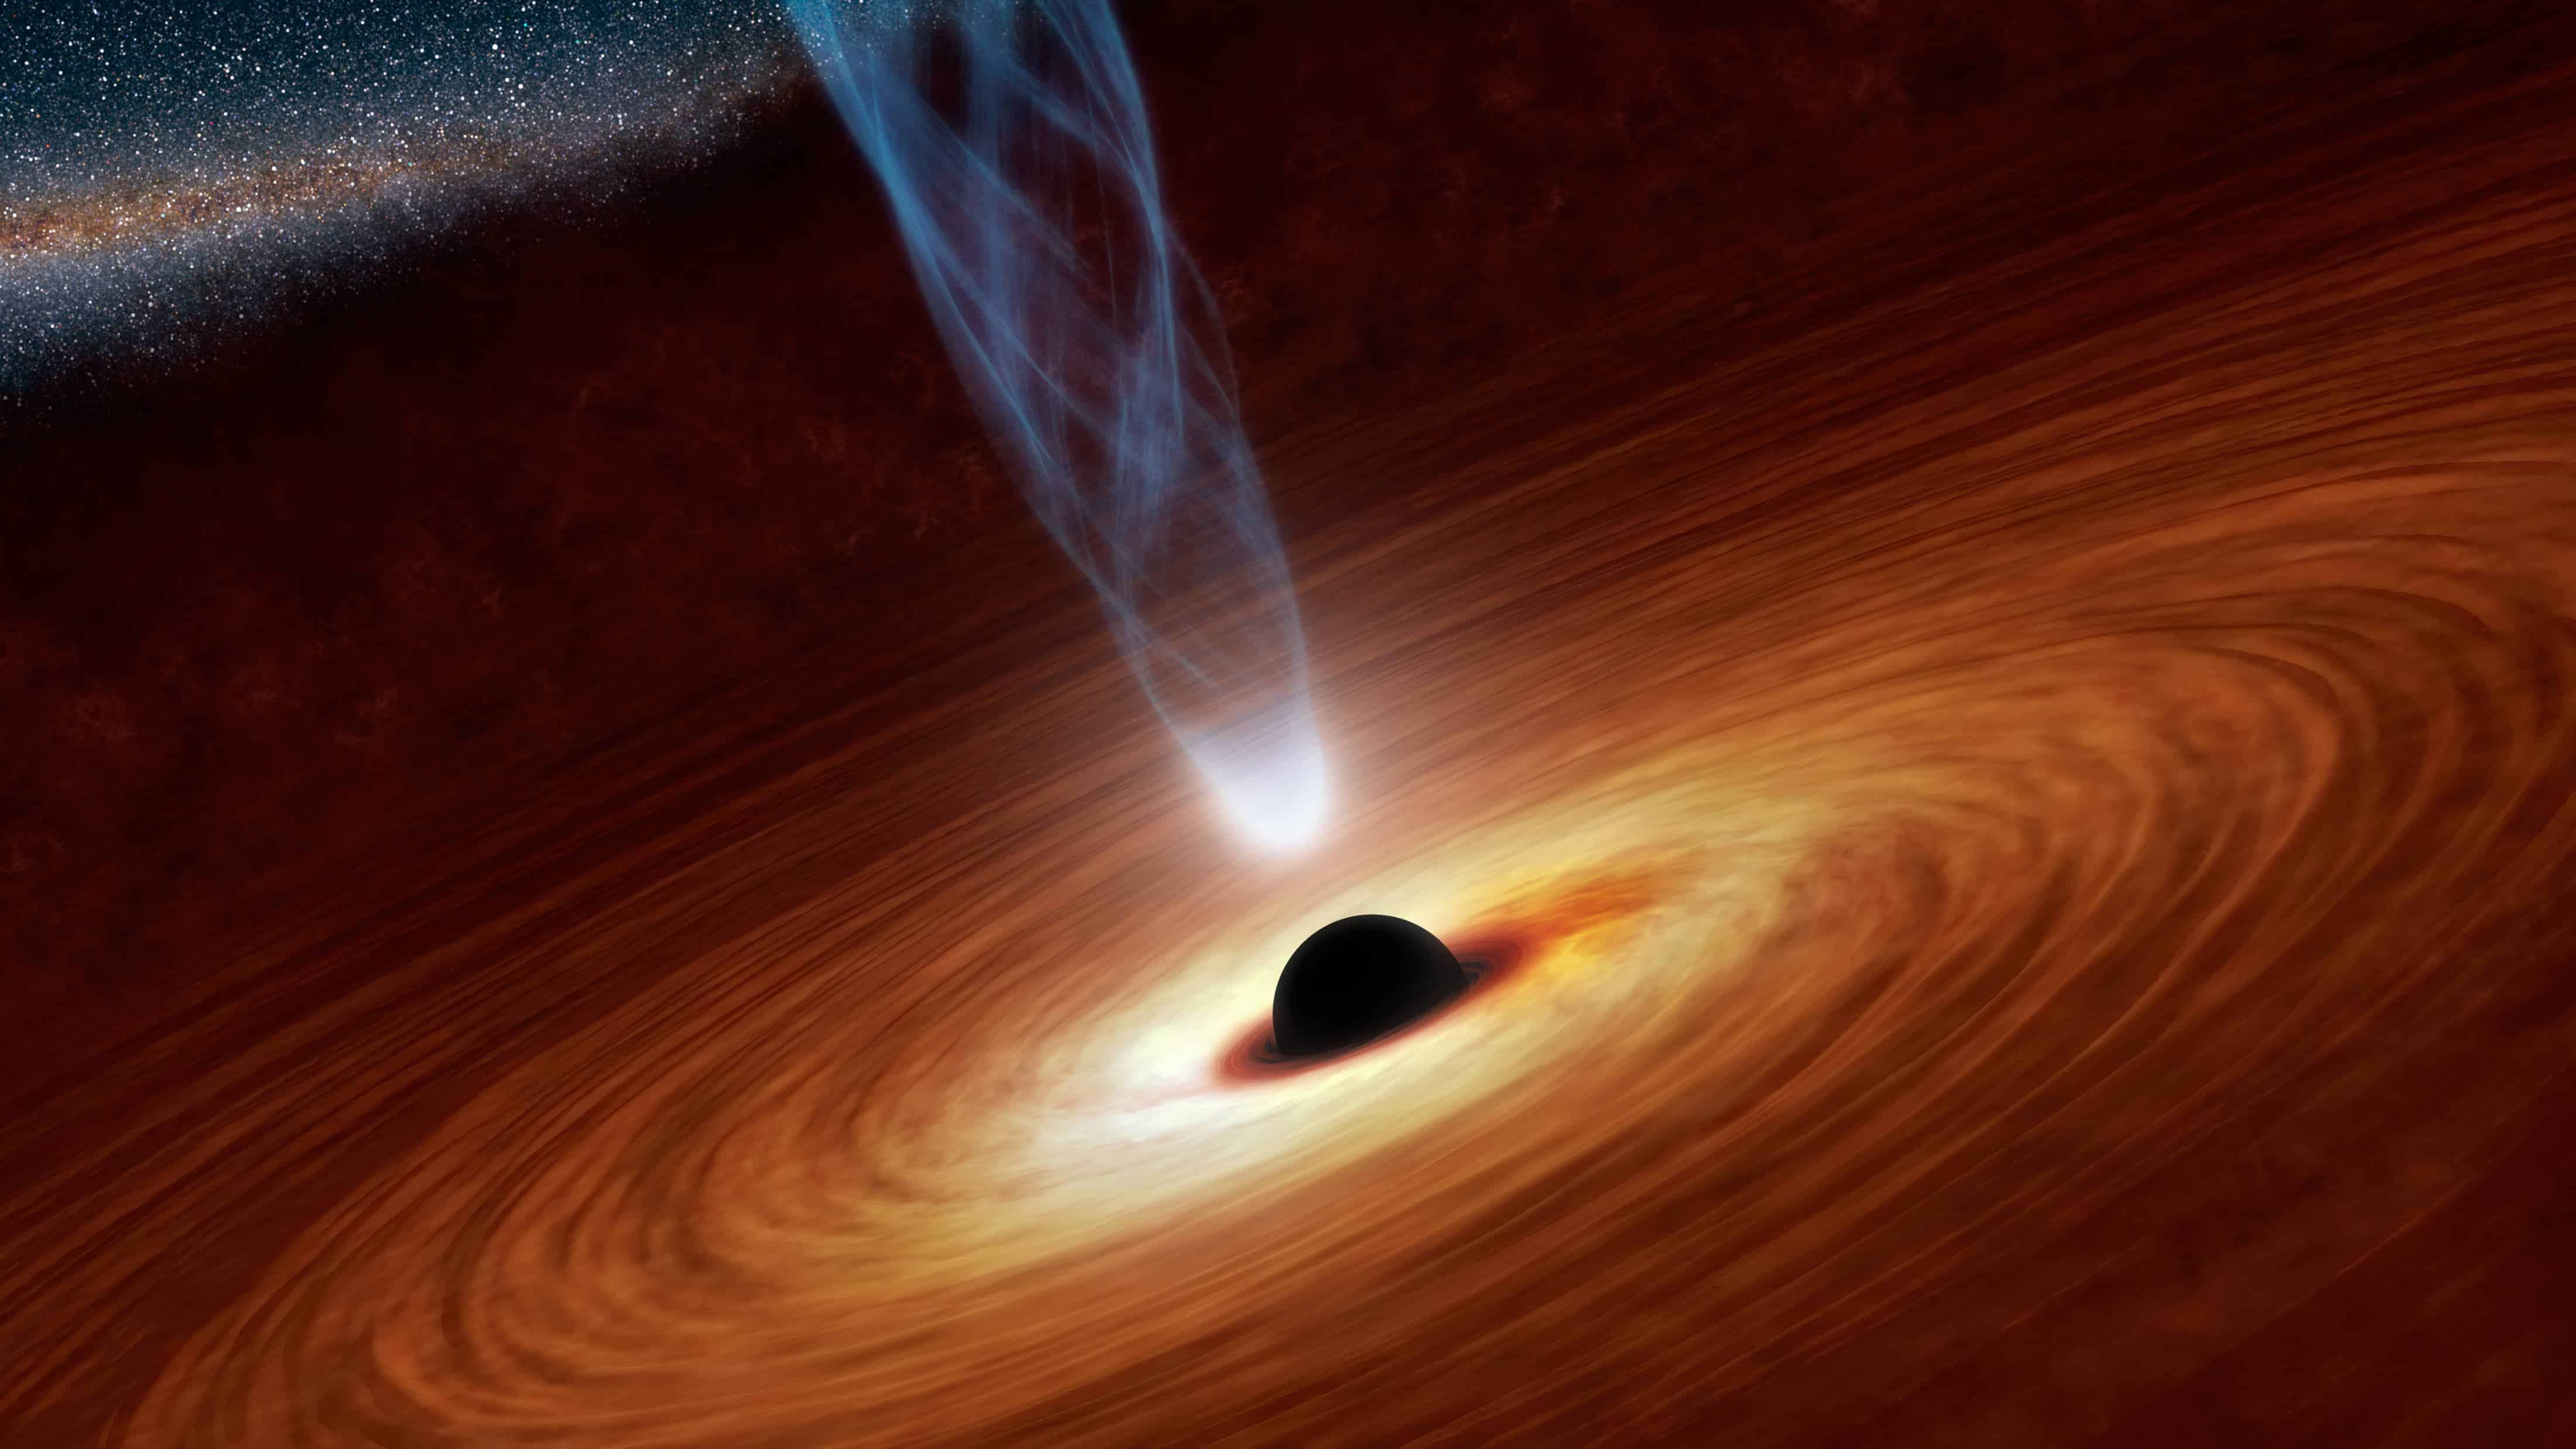 Artistic depiction of a black hole with a corona. Image by NASA/JPL.